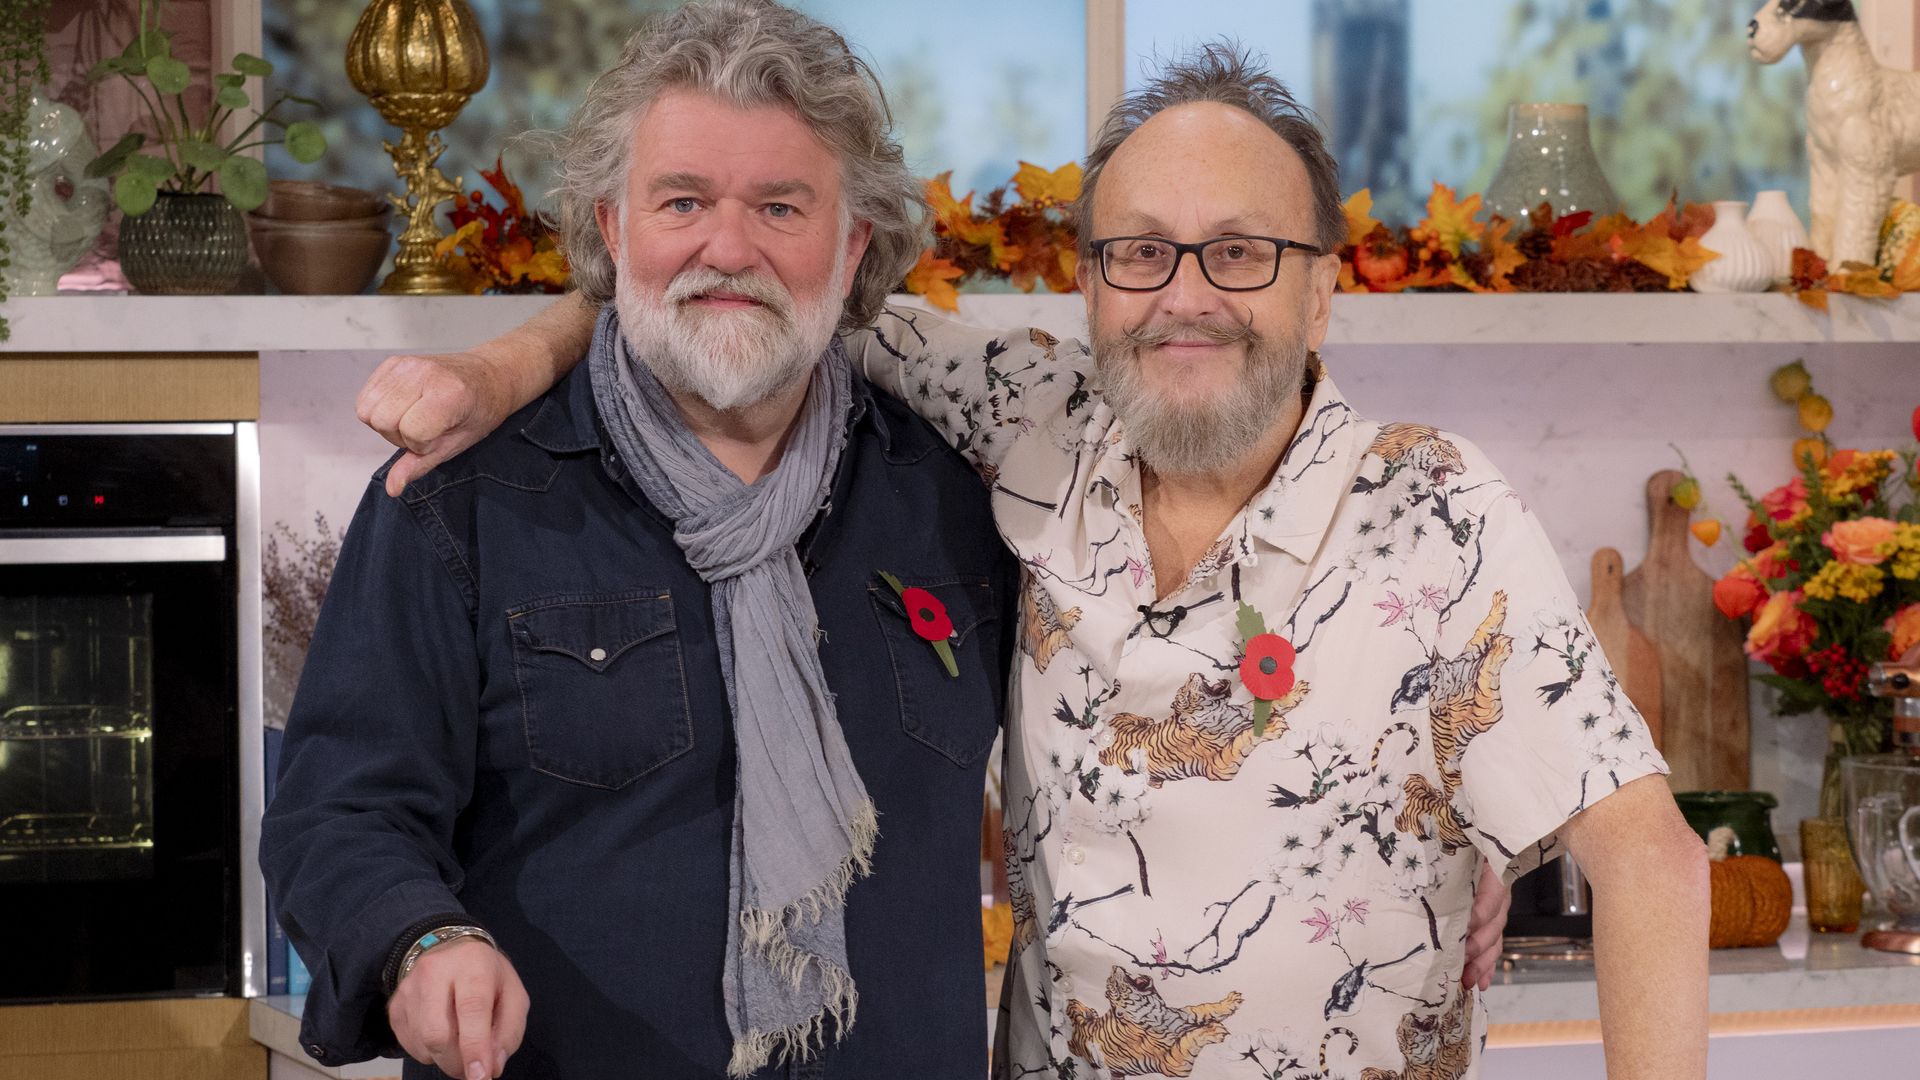 Hairy Bikers Dave and Simon on This Morning